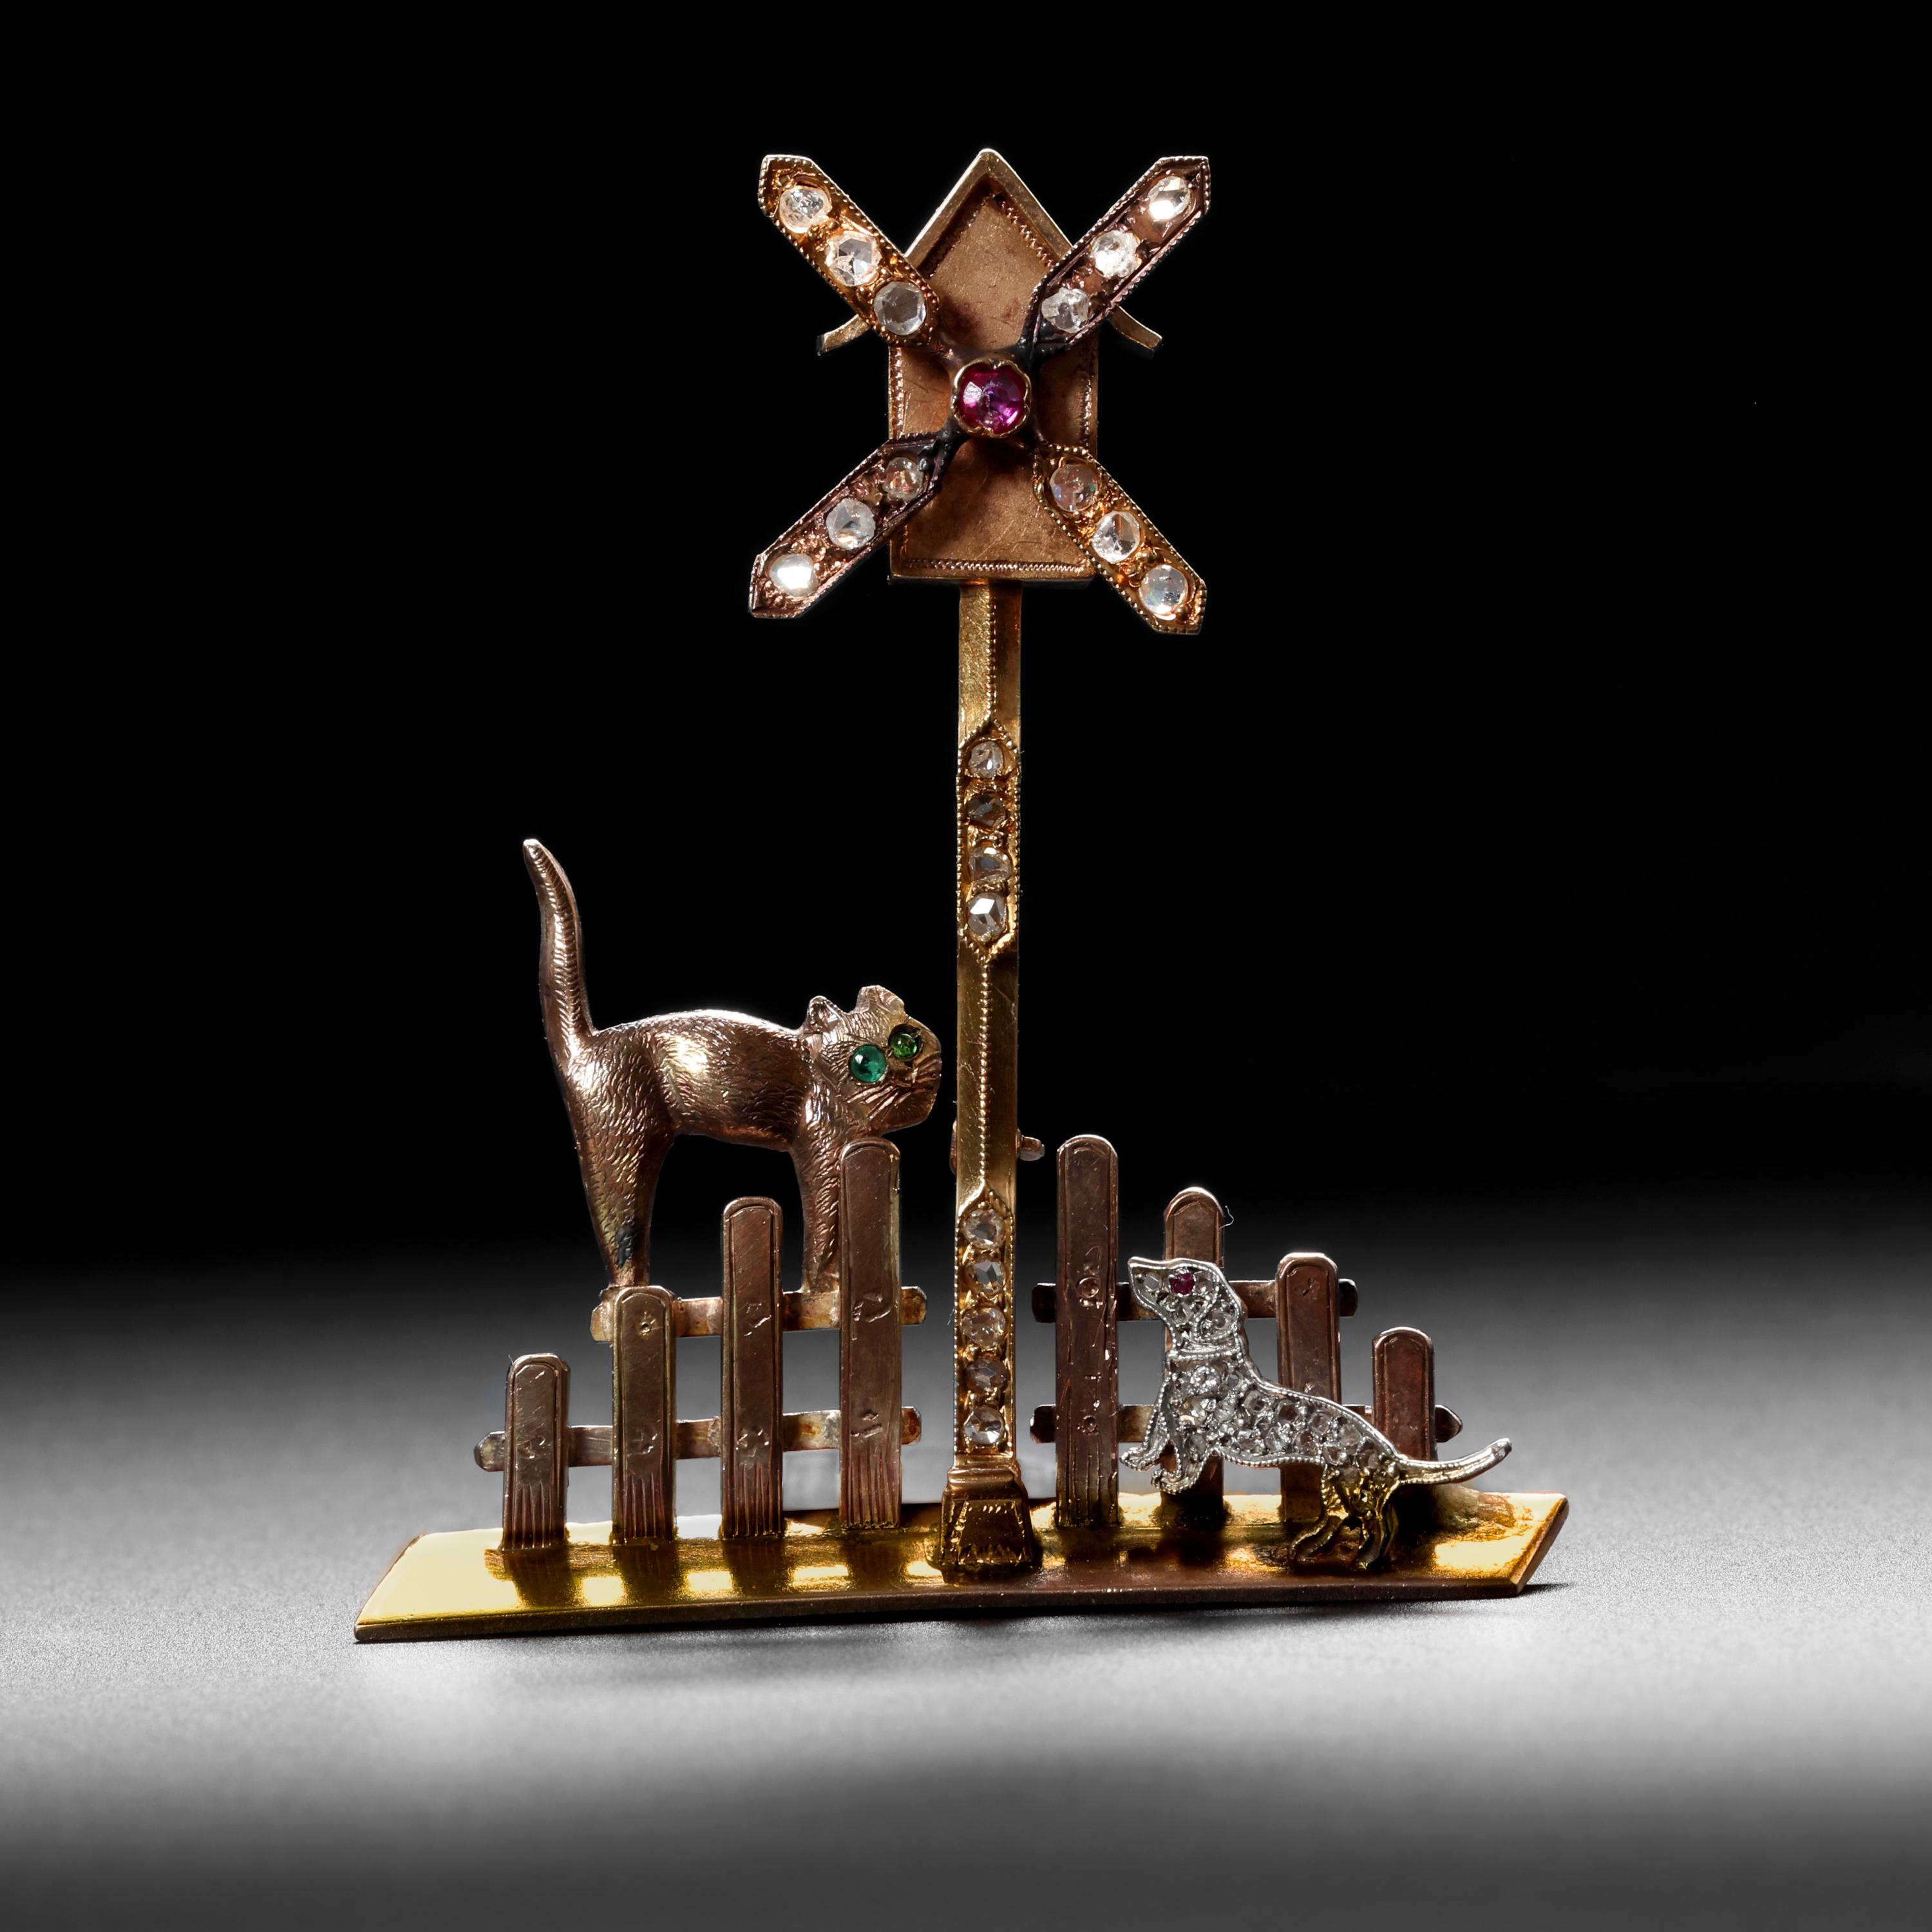 It's not a just a brooch; it's a story; a narrative. 

An emerald-eyed cat and a diamond-encrusted dog with a ruby-red spinel eye both appear quite interested in what would appear to be a cunning bird-house with a windmill attached. The picket fence